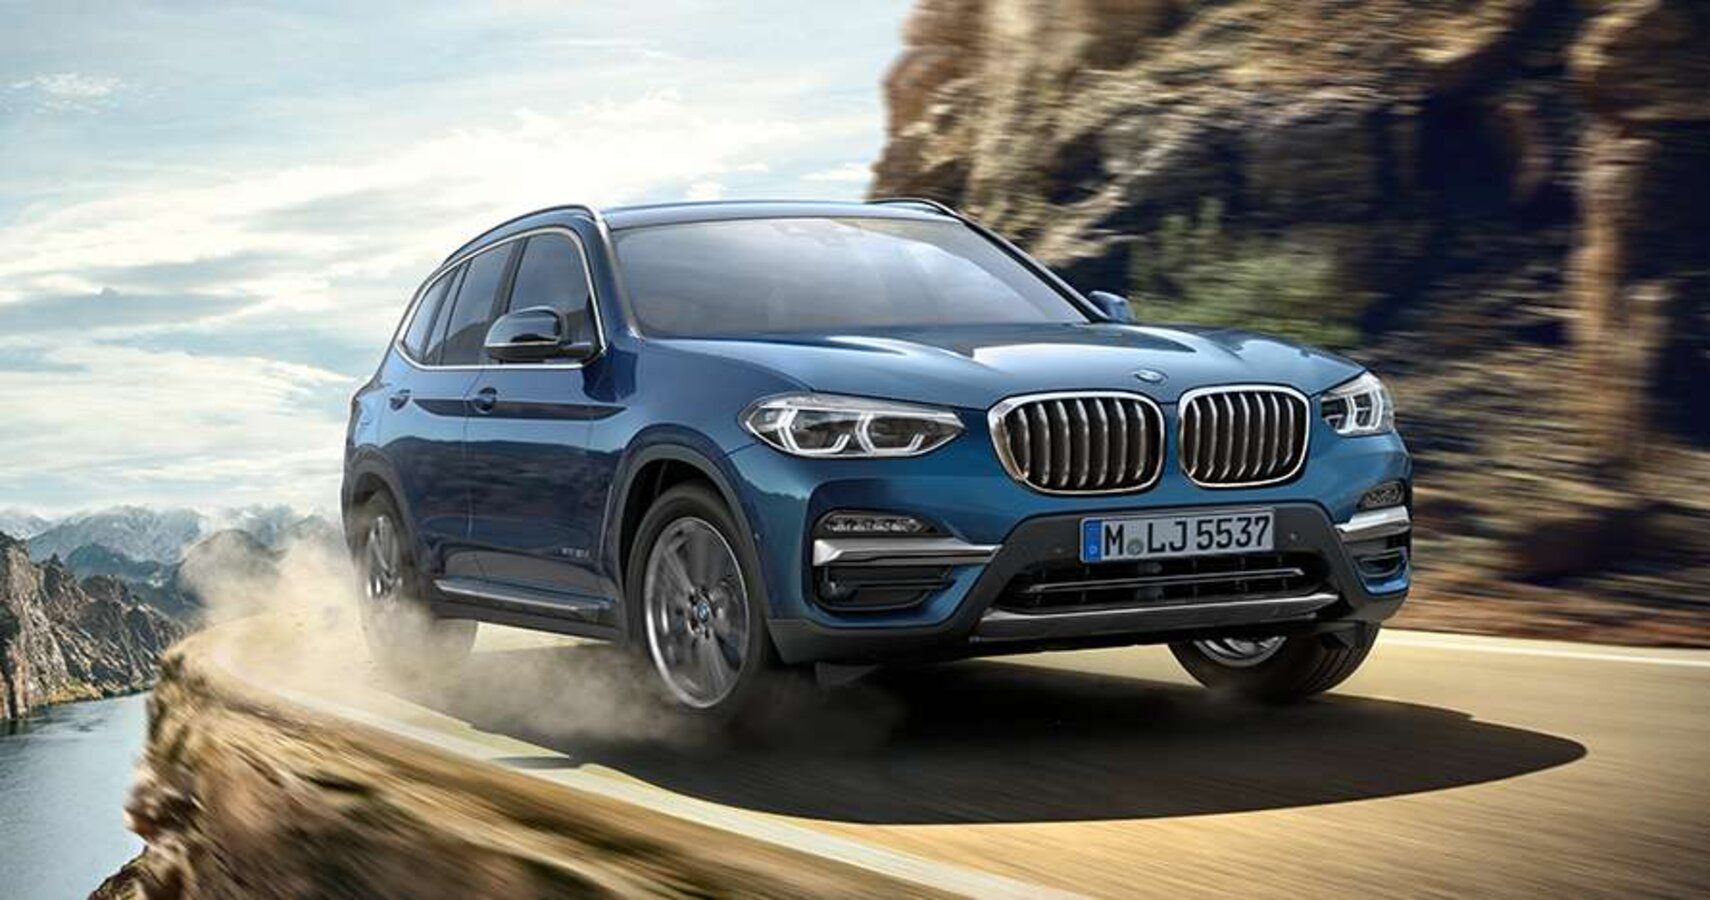 The X3 is the most reliable BMW car